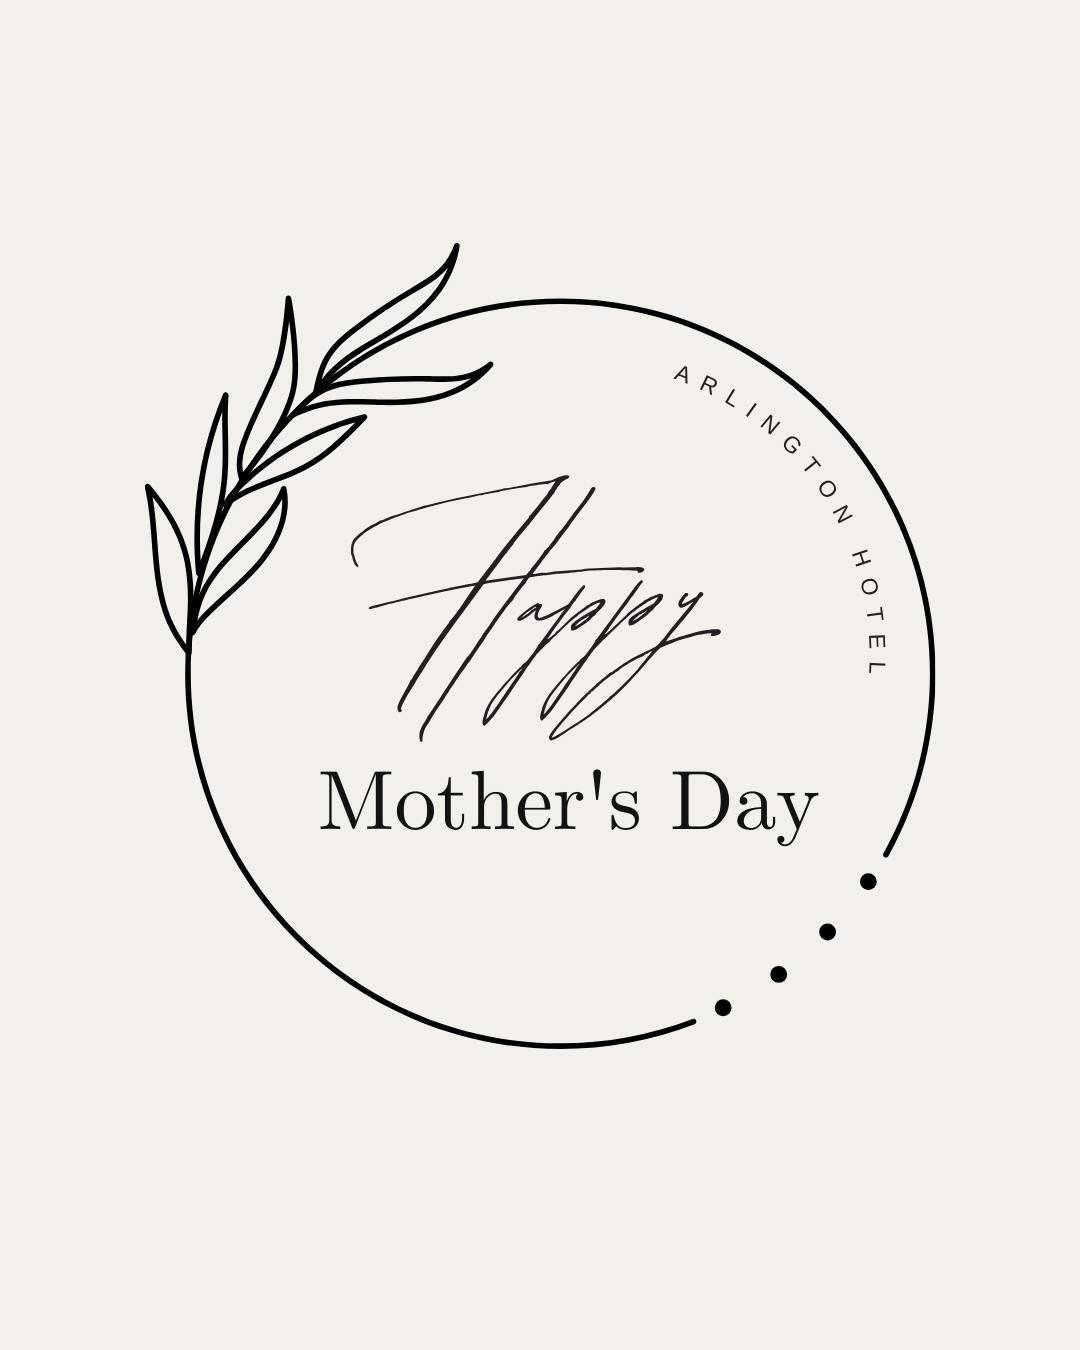 Happy Mother's Day to all the moms from all of us here at The Arlington! #ArlingtonHotel⁠
.⁠
.⁠
.⁠
#hospitality #paris #ontario #mom #mothersday #sundaybrunch #riversedge #